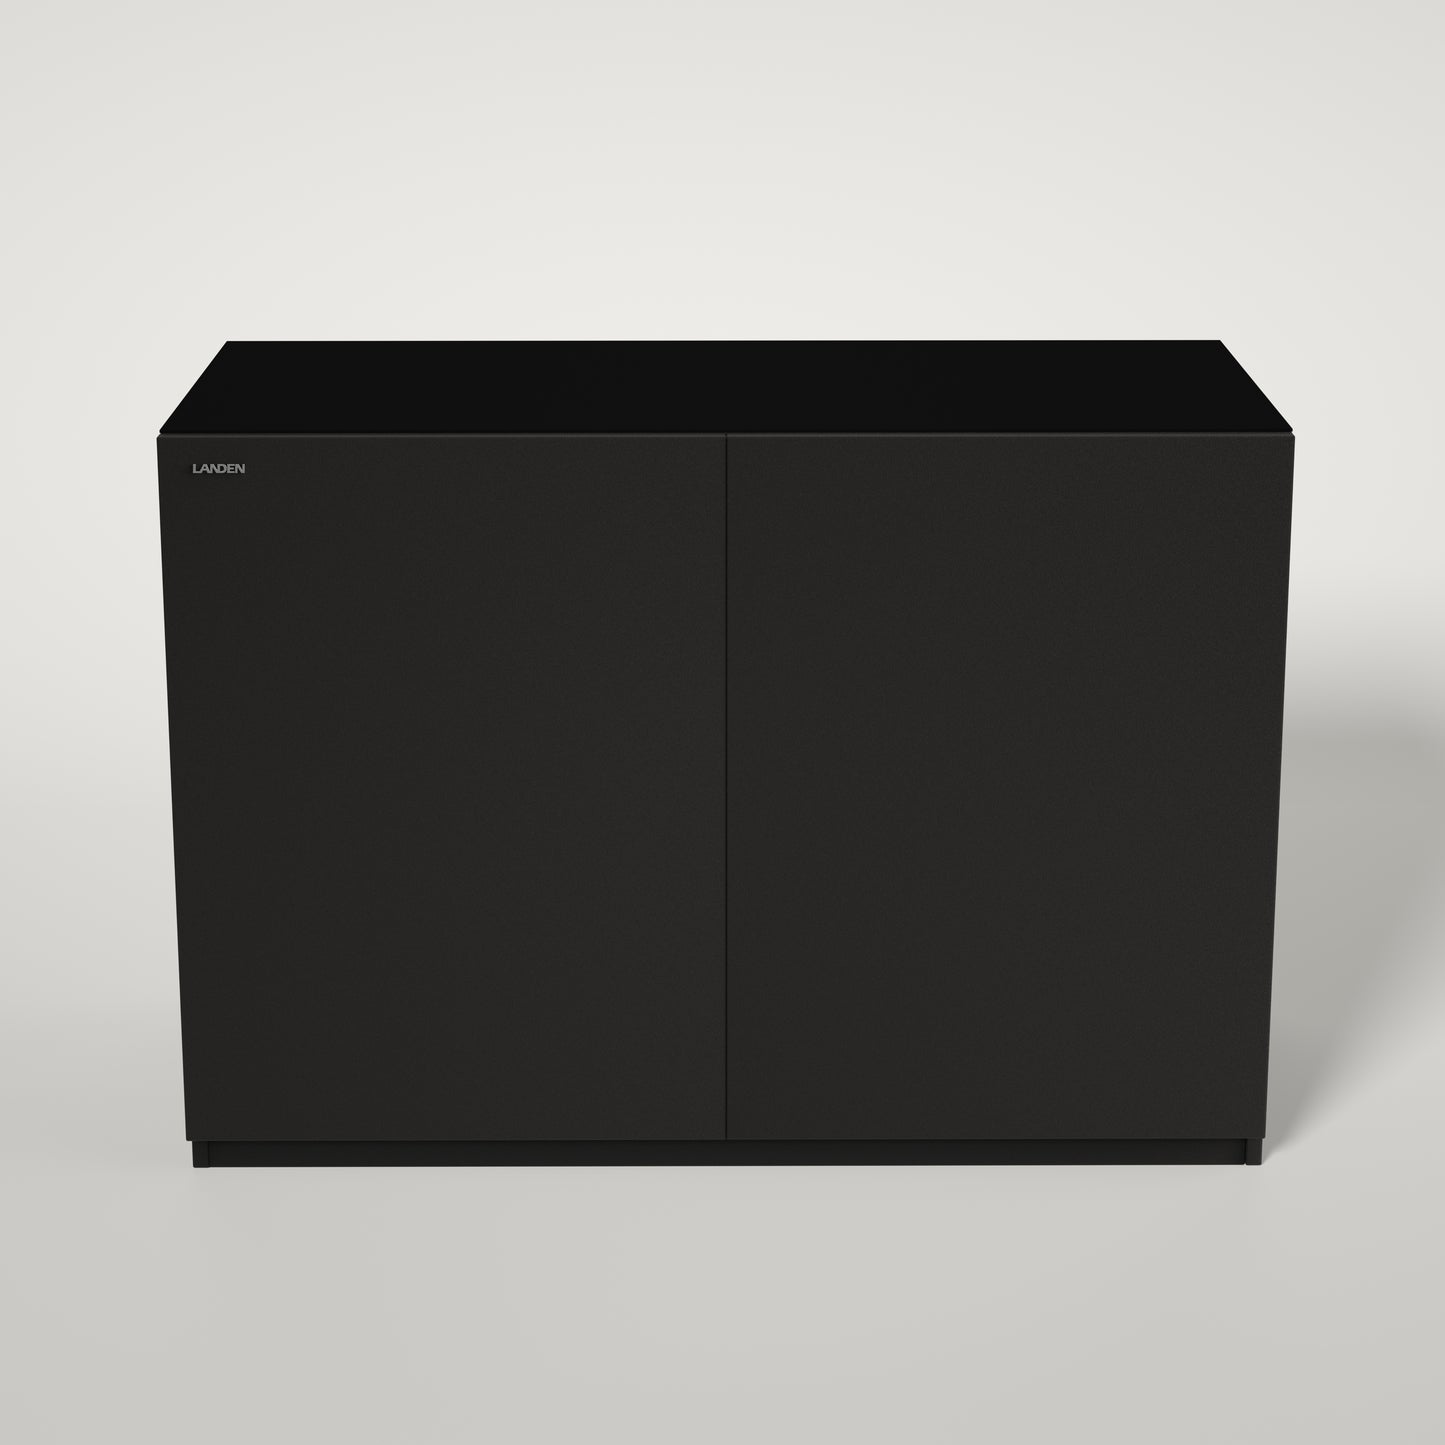 LANDEN Aquarium Stand and Cabinet, for72.2Gal Tank,W47.2xD19.7xH33.9 in Wooden Matte Black Painted (Stand Only)